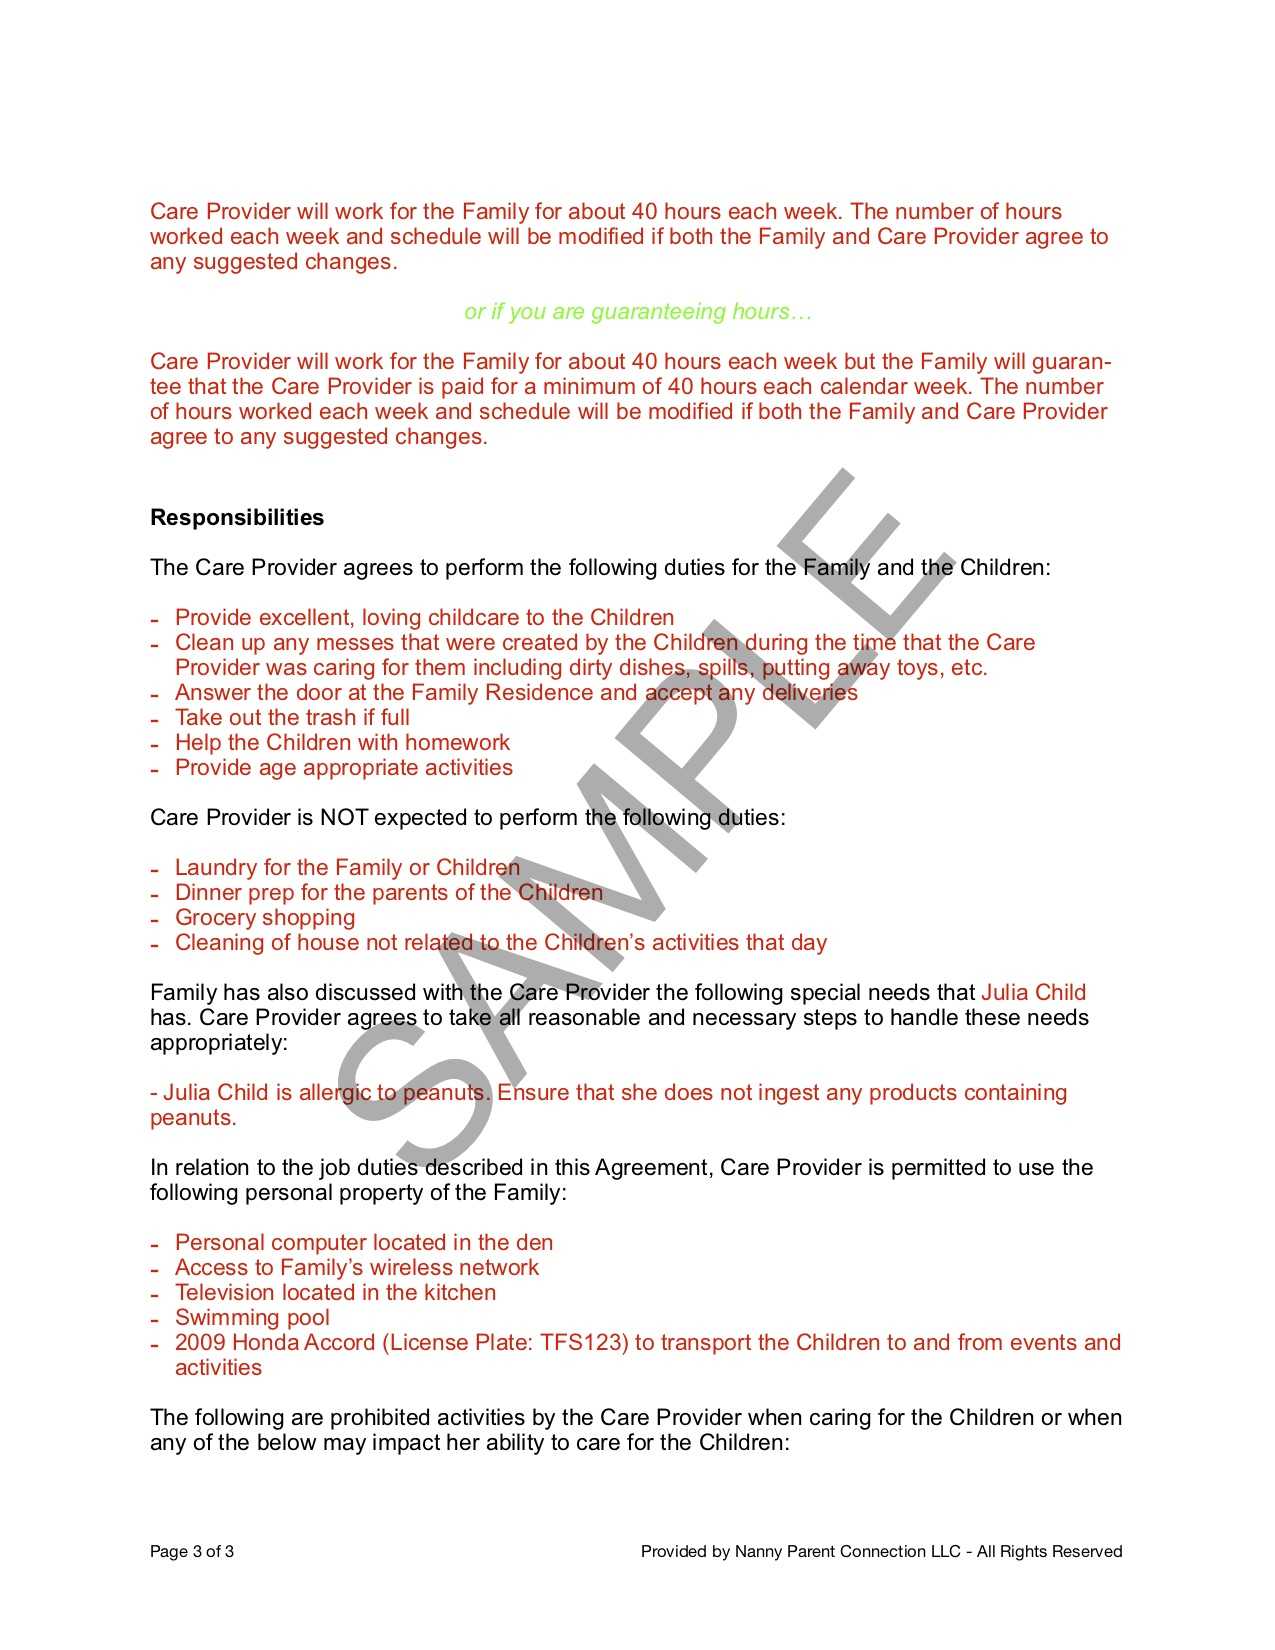 Household Employee Agreement | Nanny Parent Connection Inside Nanny Contract Template Word